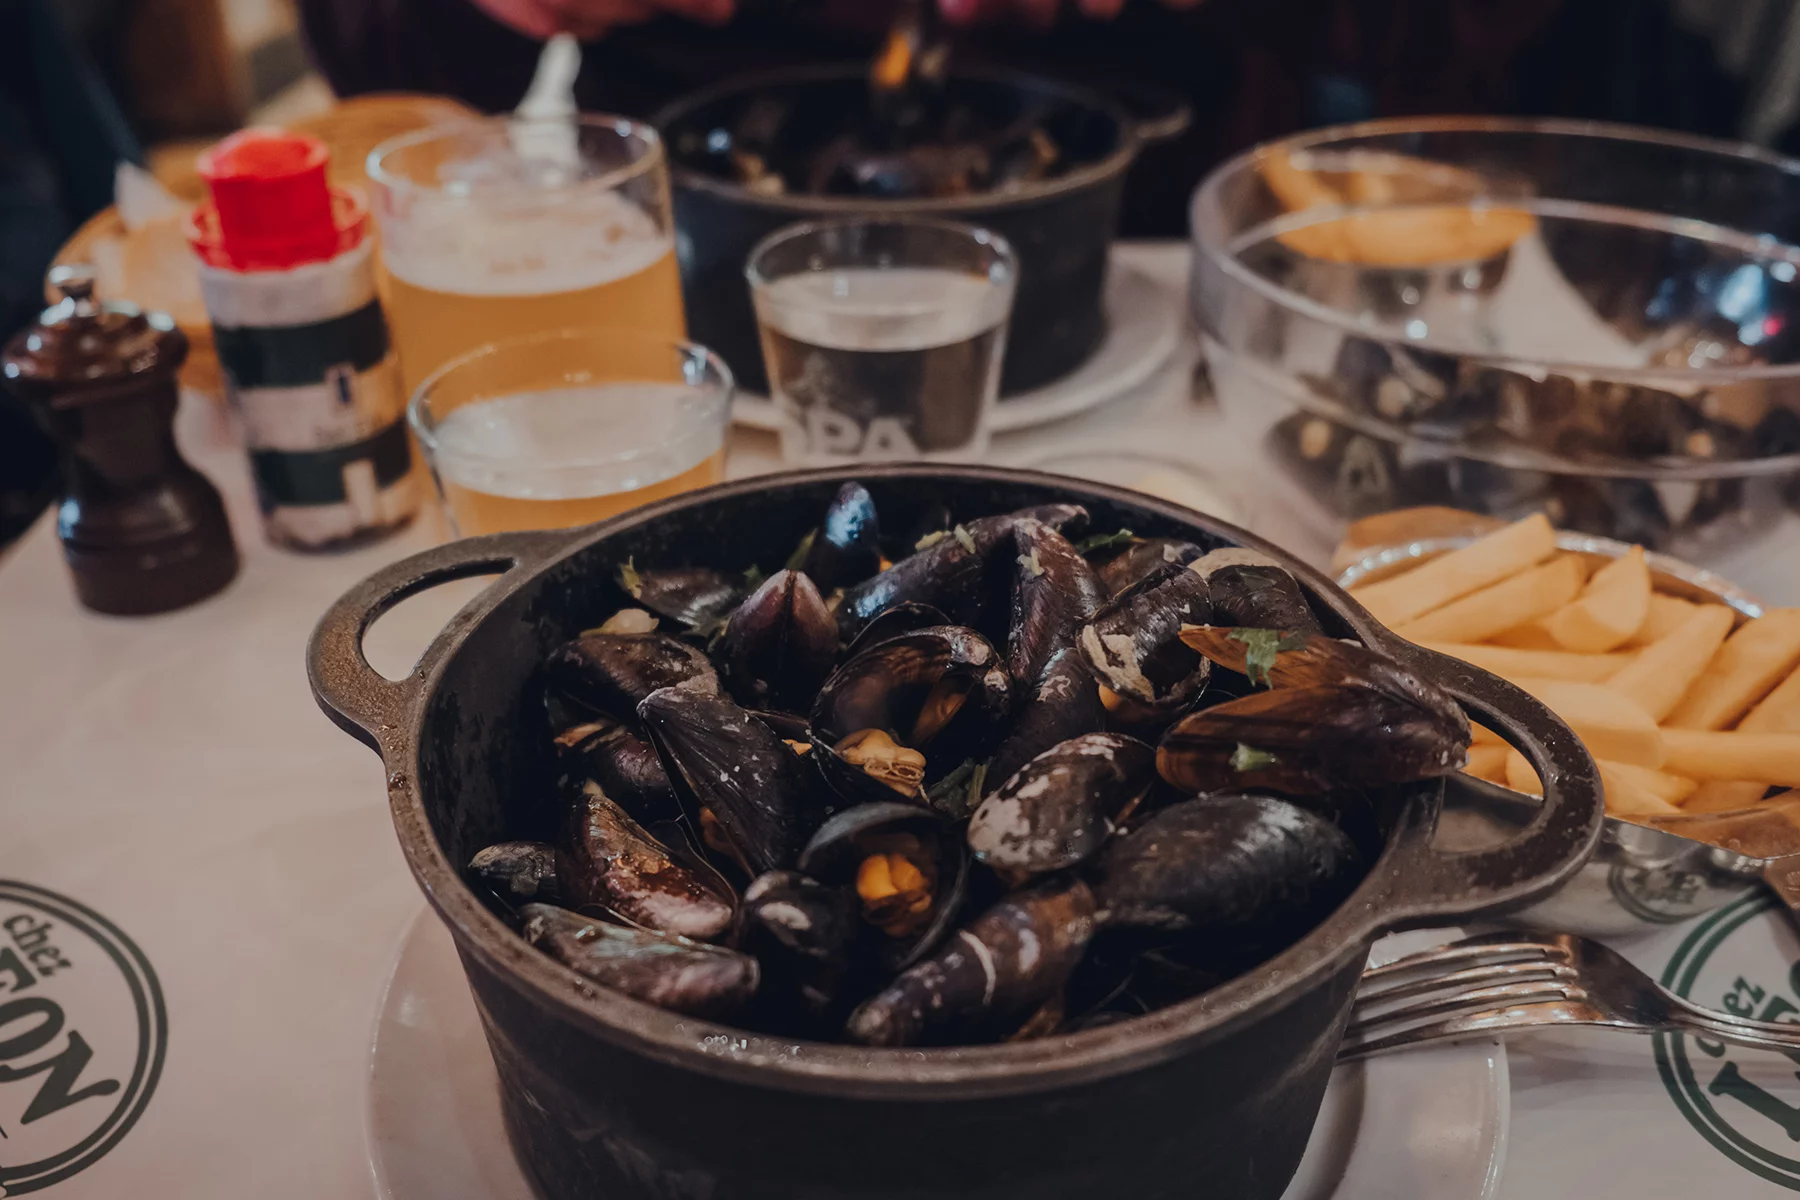 A serving of moules frites at a restaurant in Brussels